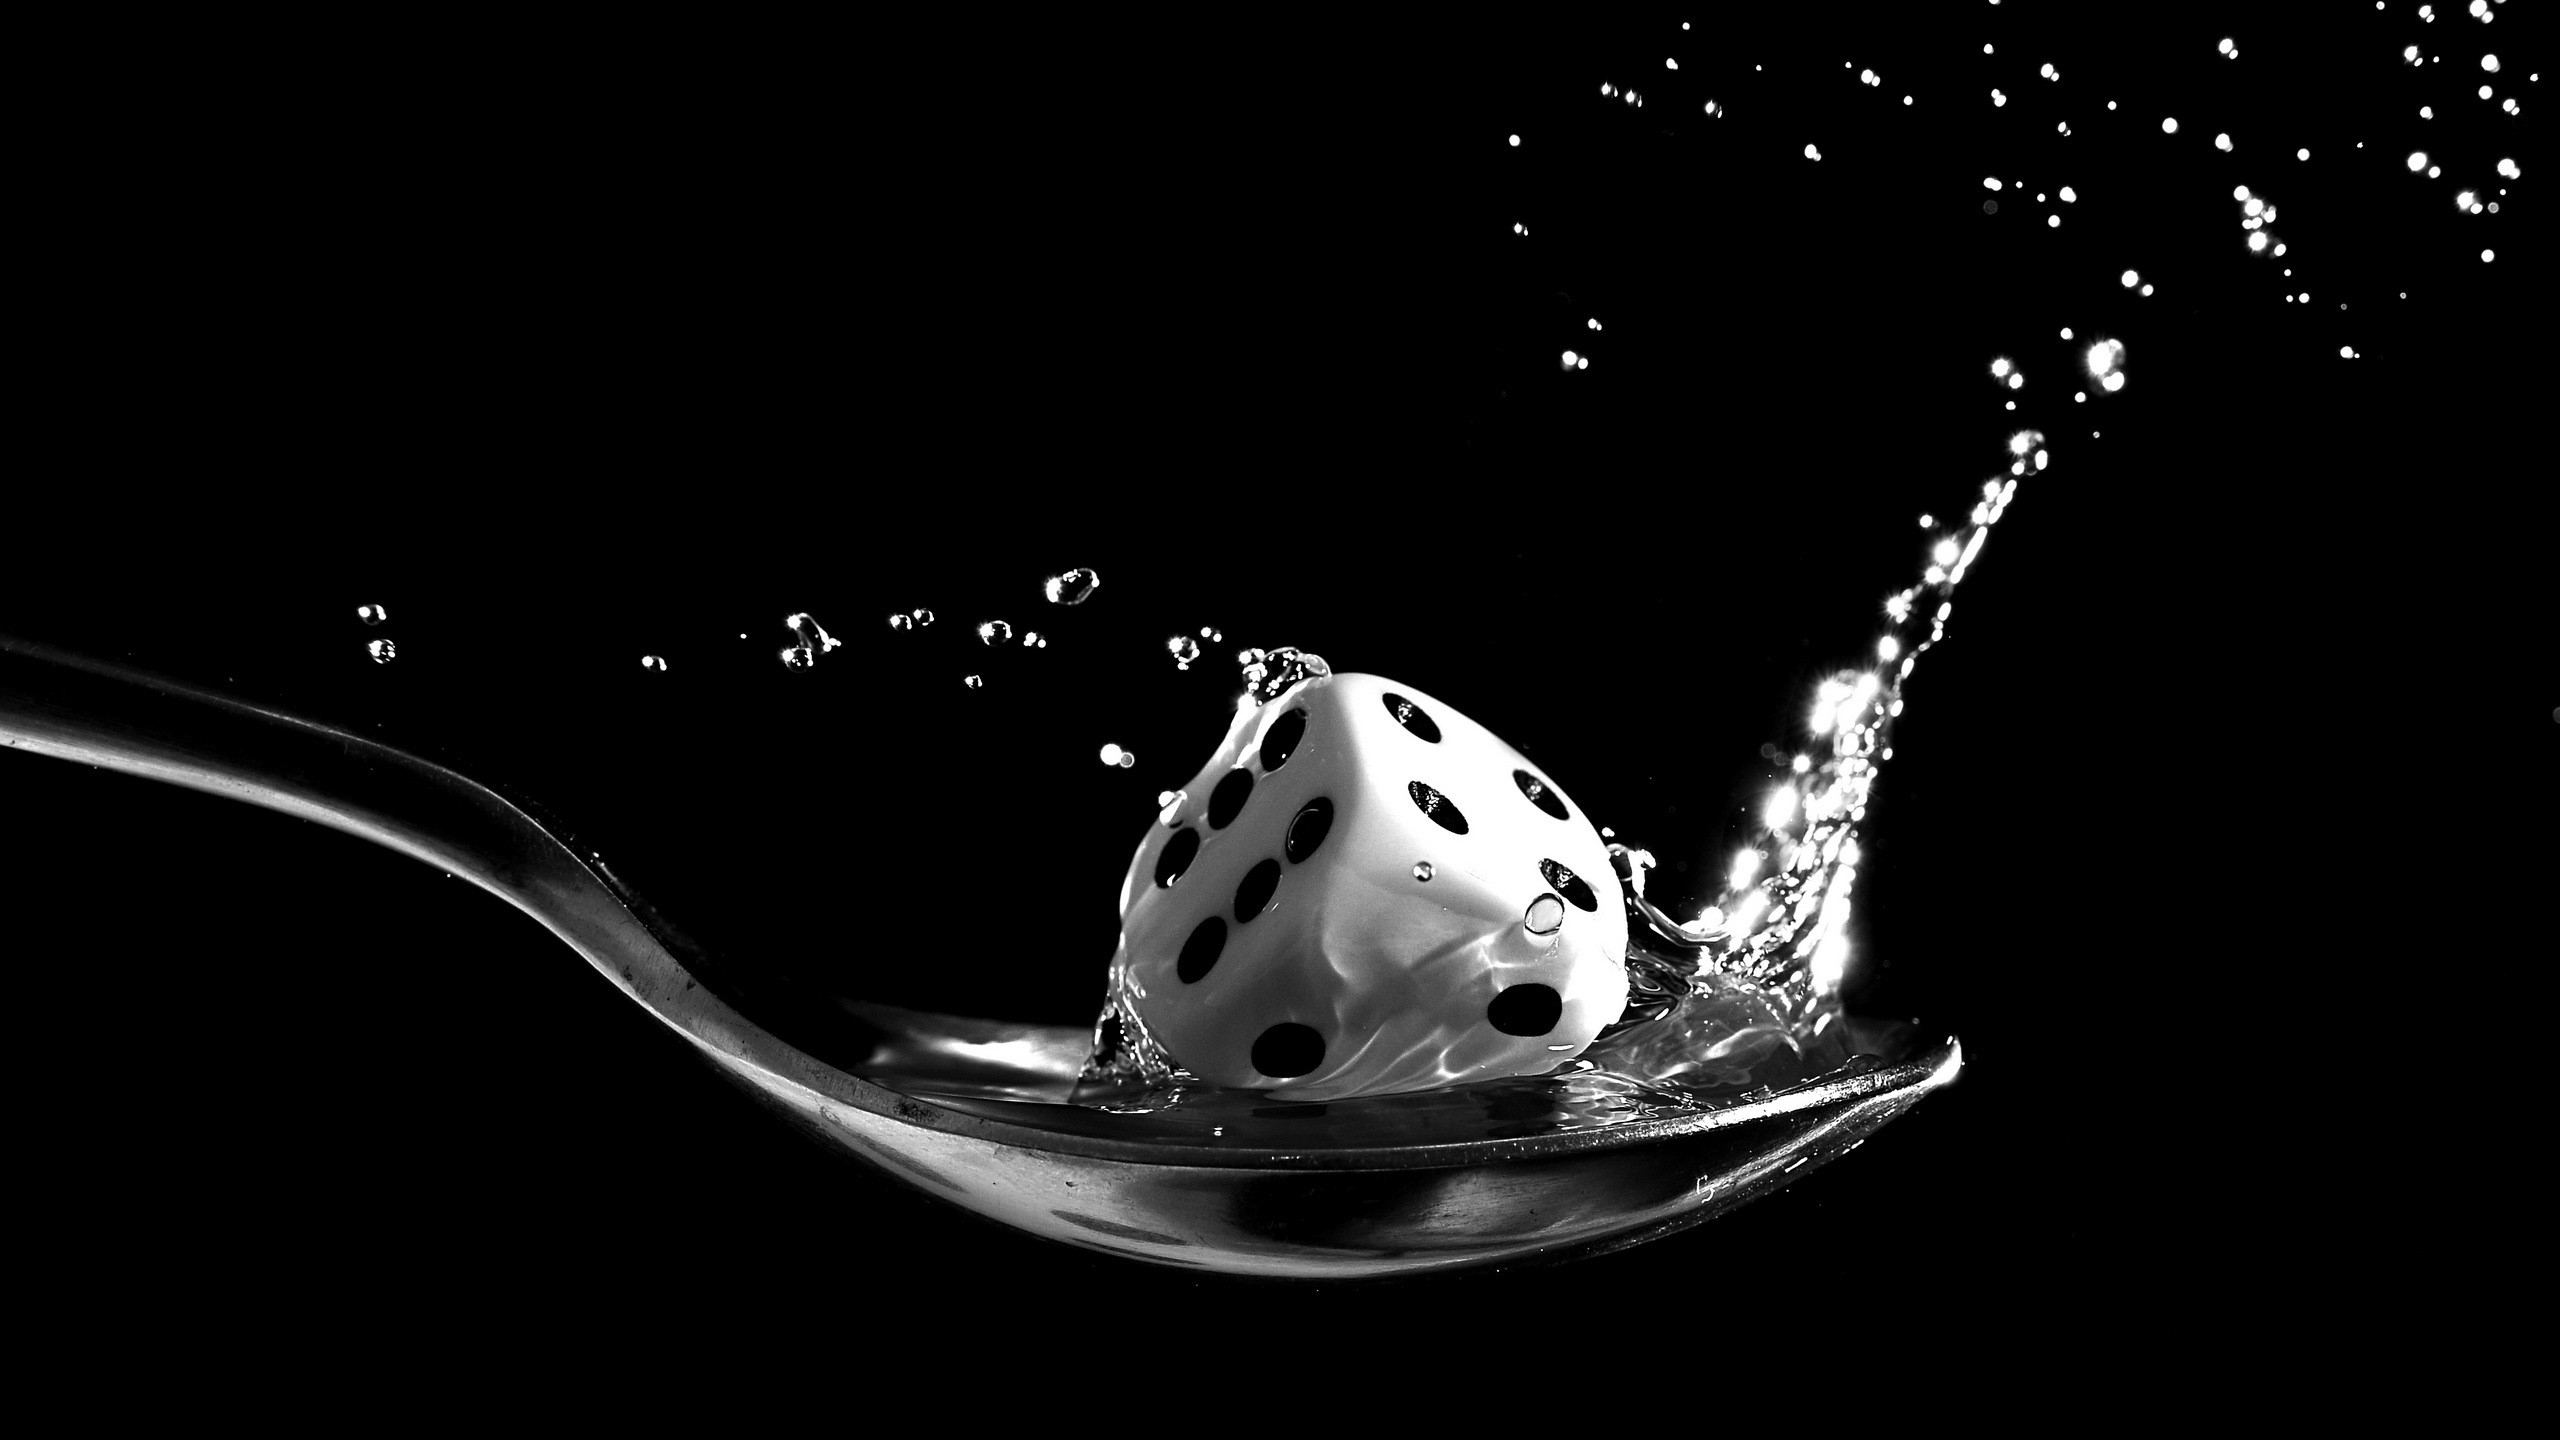 General 2560x1440 spoon dice cube dots splashes water water drops black background closeup monochrome